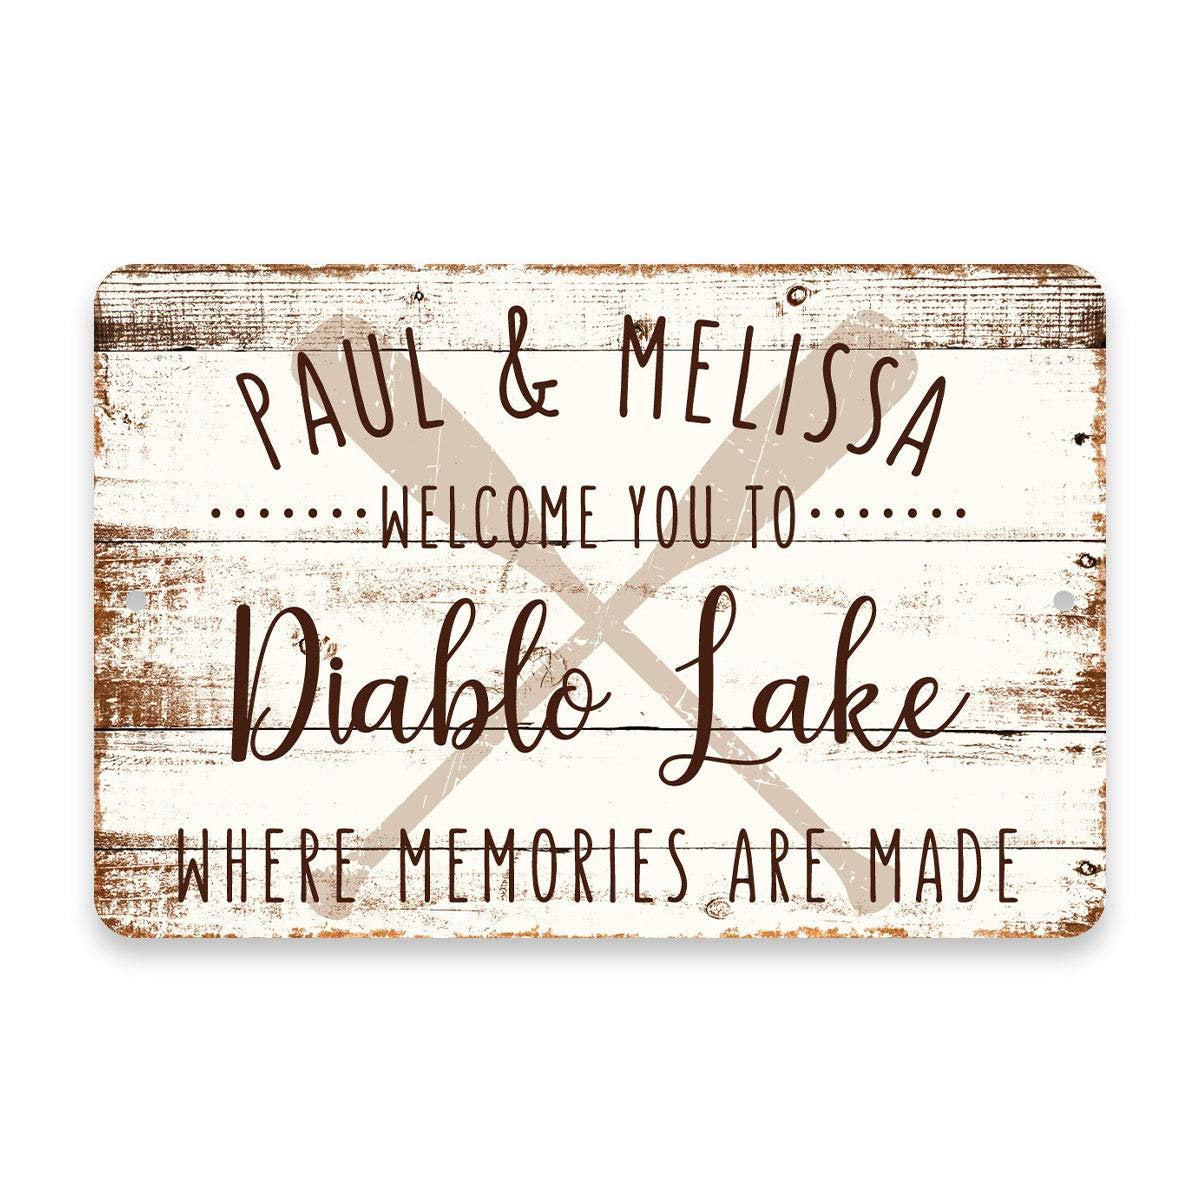 Personalized Welcome to Diablo Lake Where Memories are Made Sign - 8 X 12 Metal Sign with Wood Look